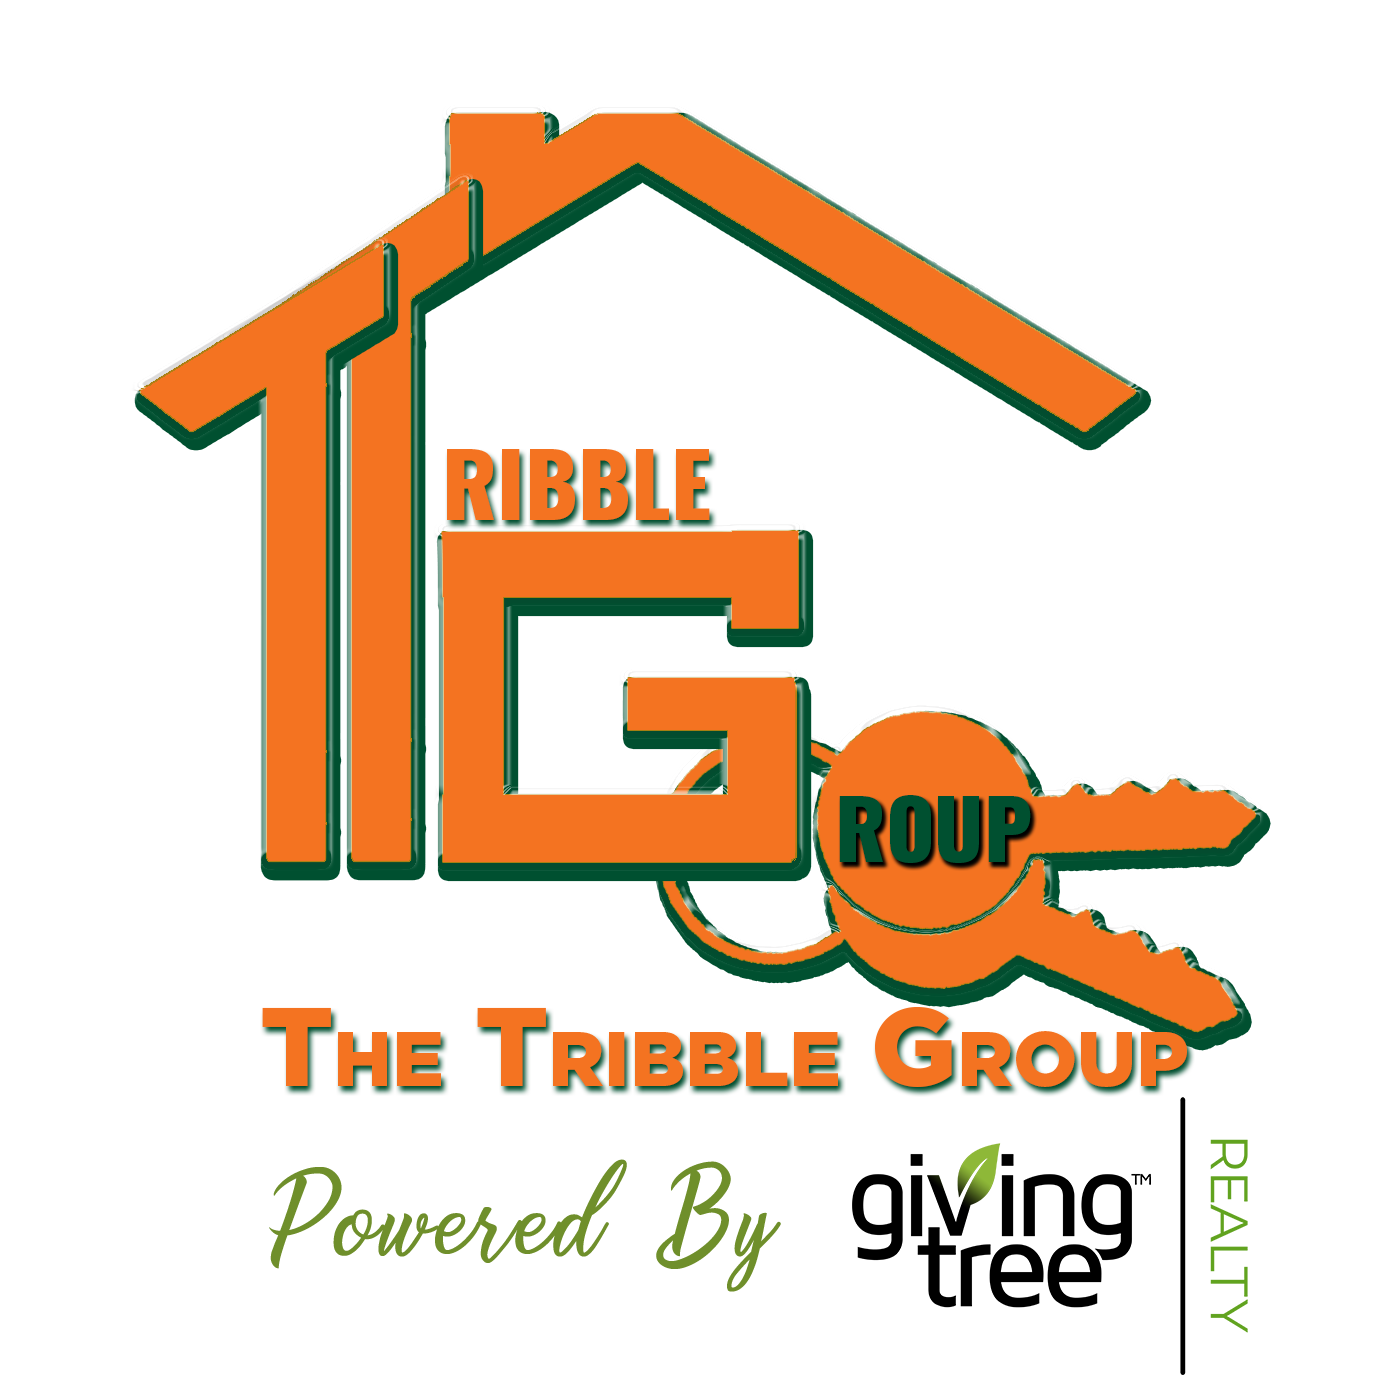 The Tribble Group